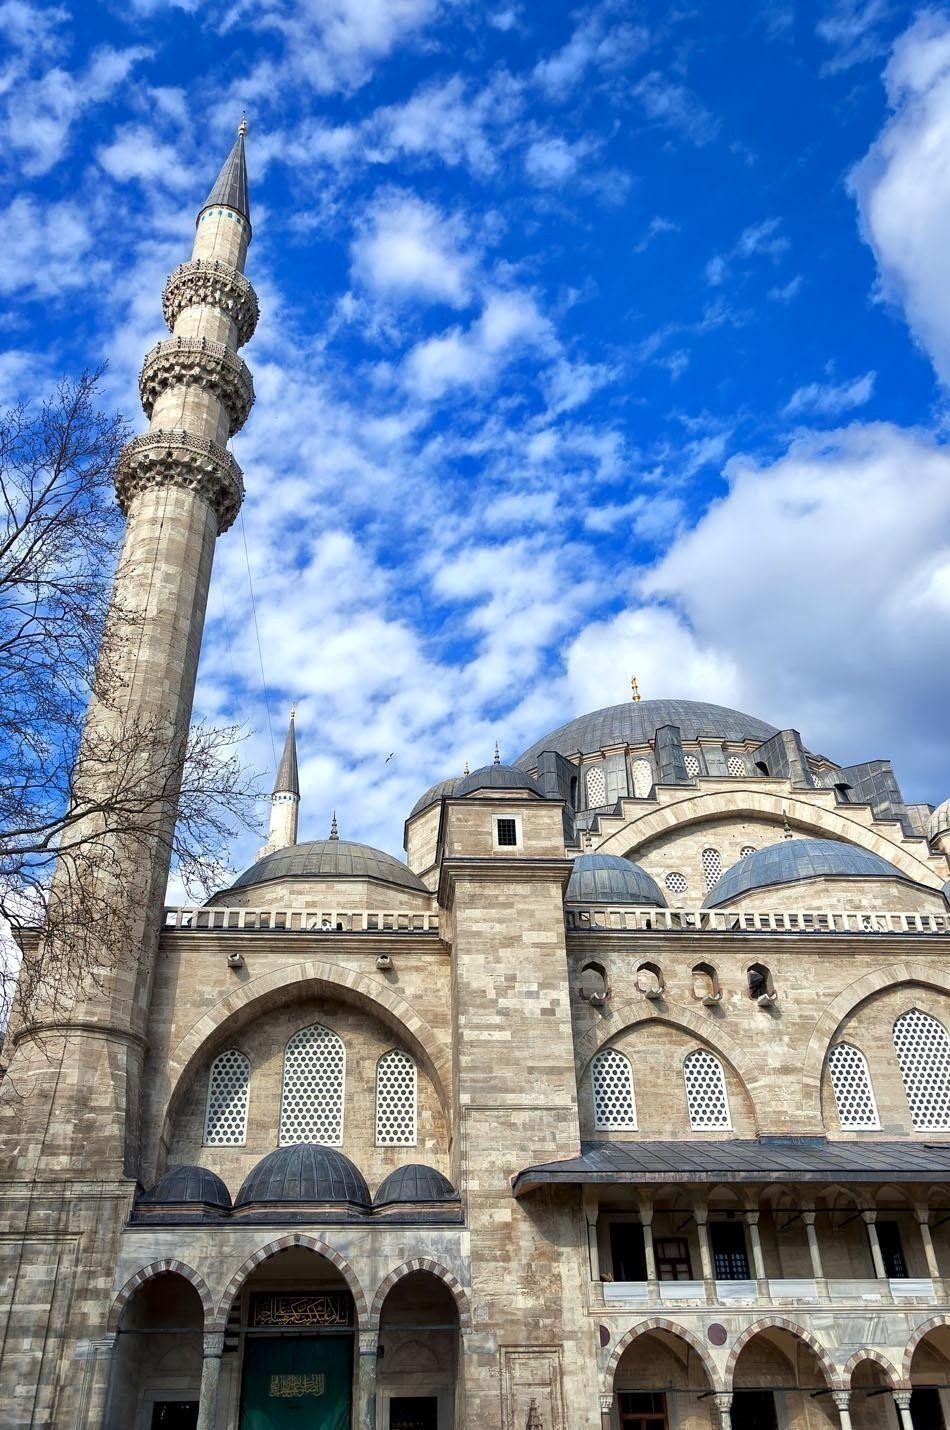 A view of the Majestic Suleiman Mosque in Istanbul, Turkey | Turkey Travel Guide